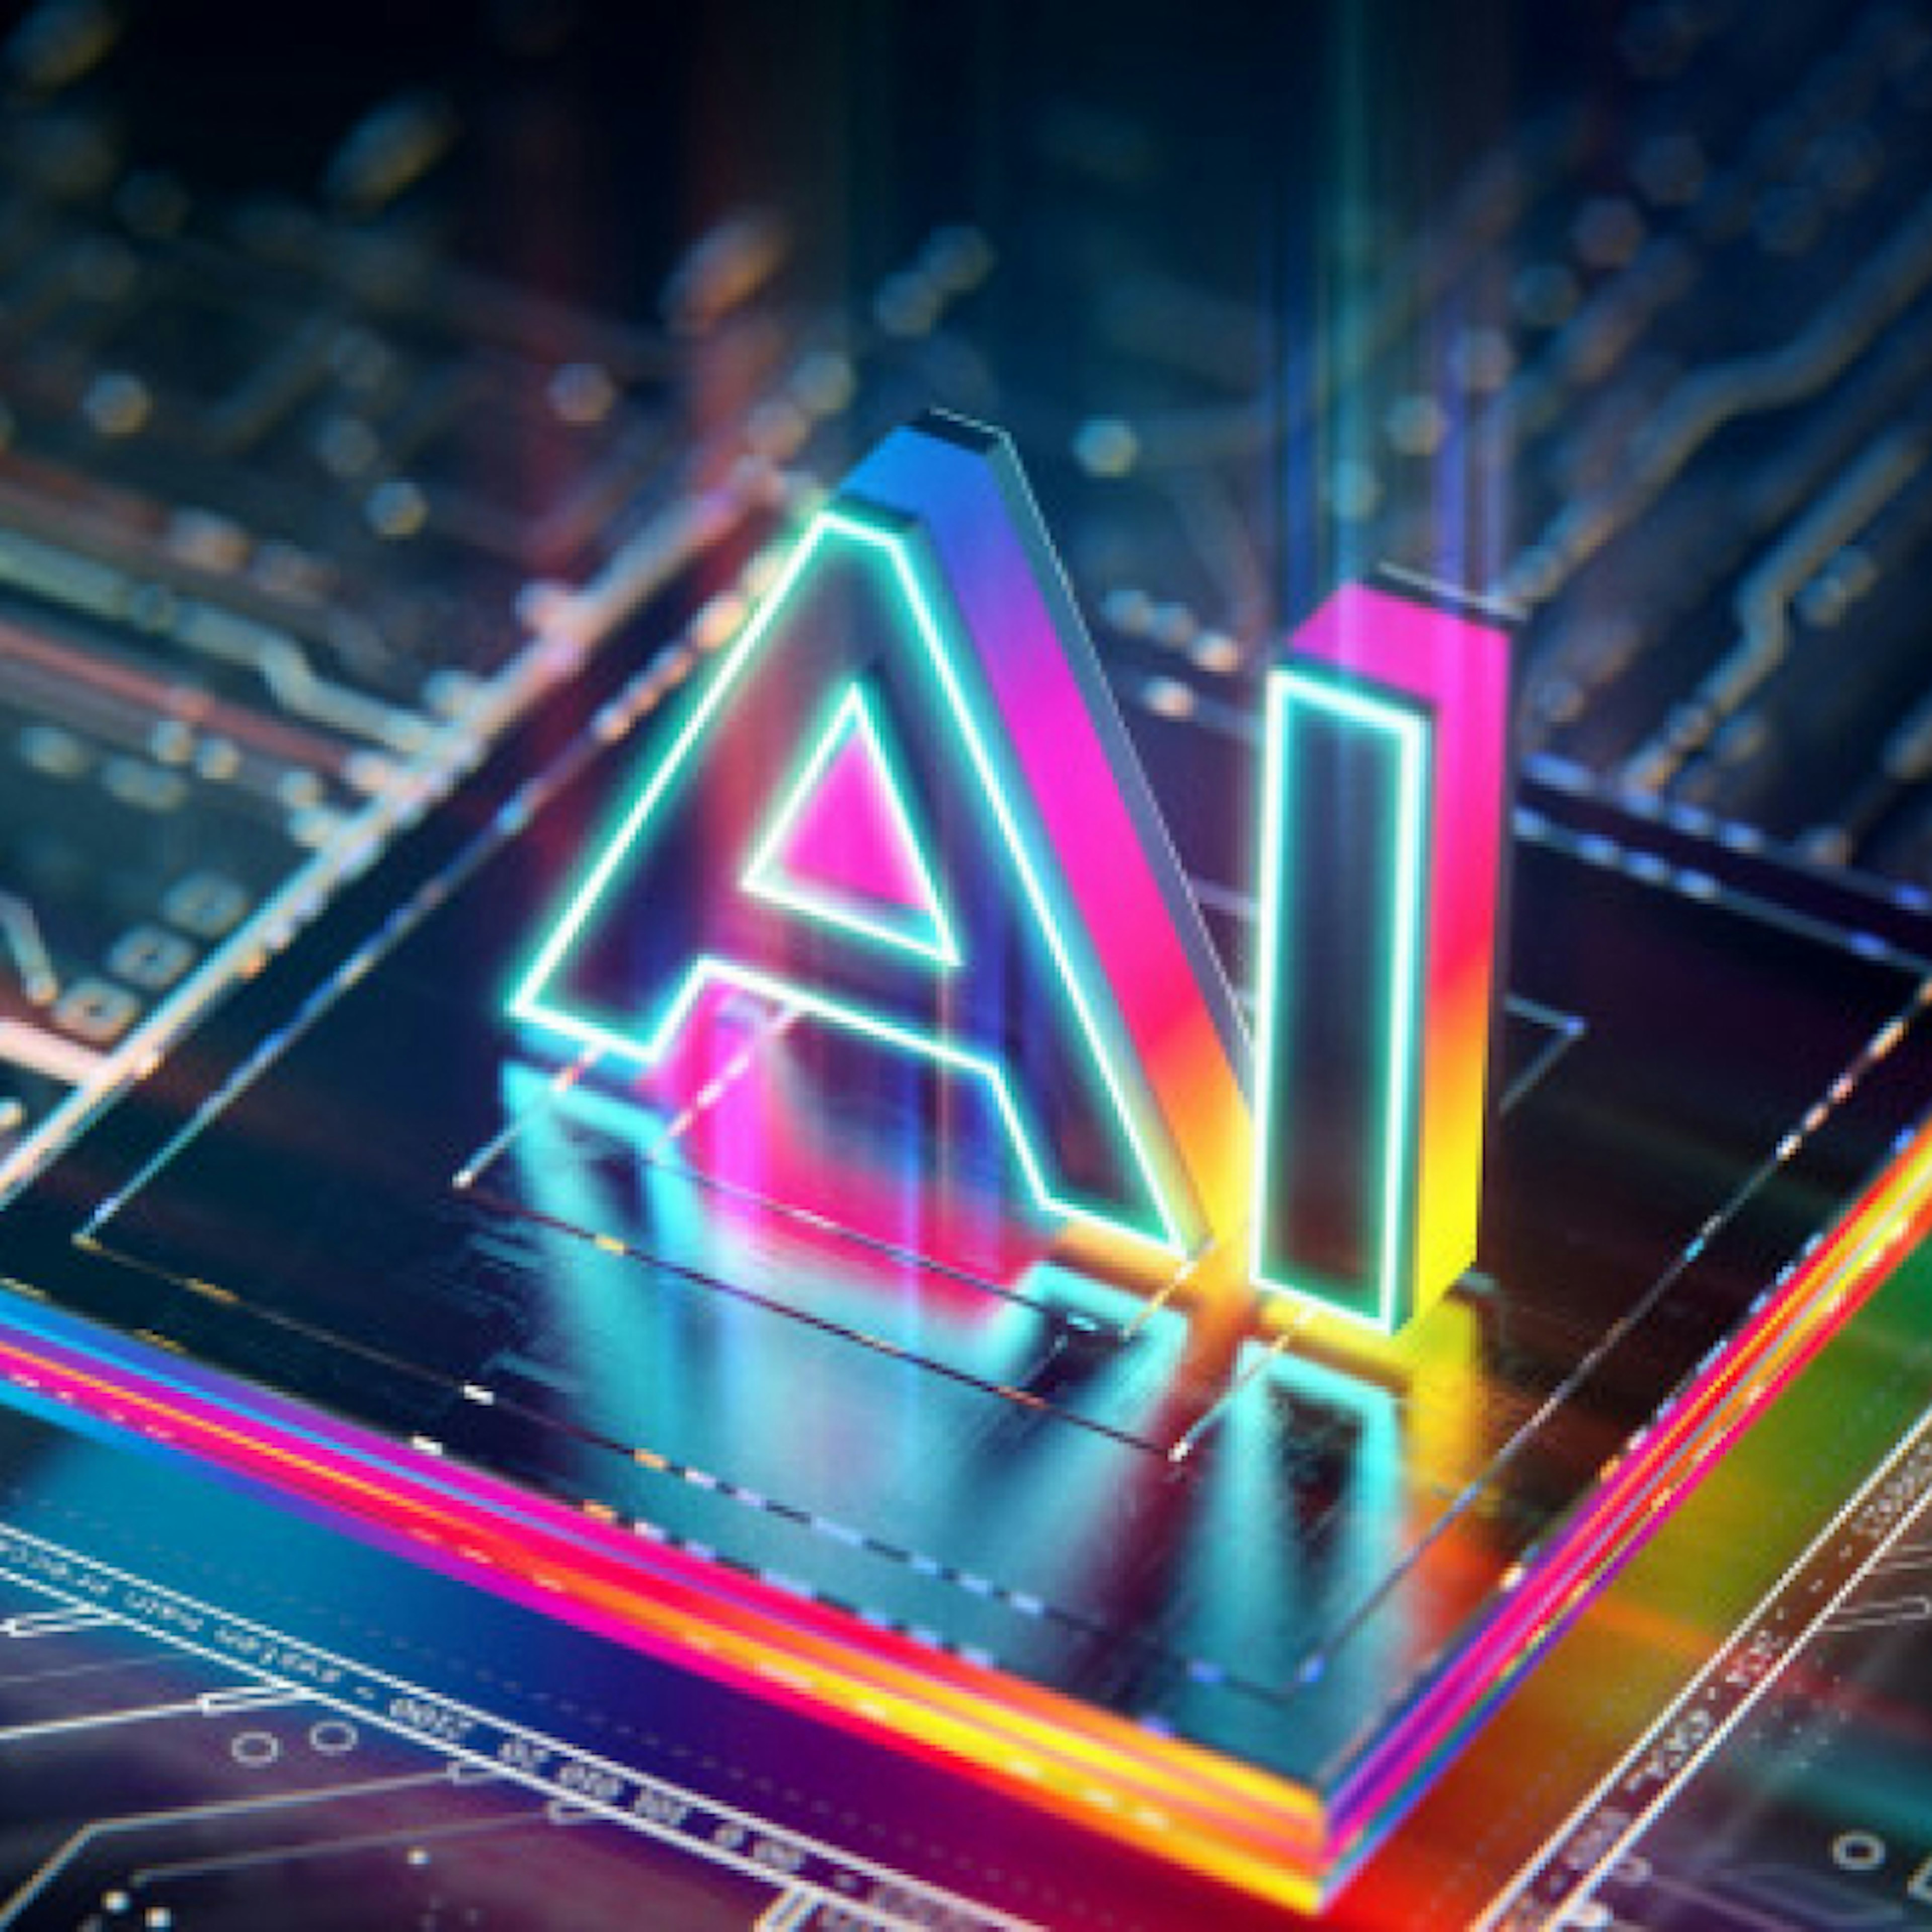 The abbreviation AI is on top of a close up of a computer chip. The chip and AI have a rainbow neon shadow.